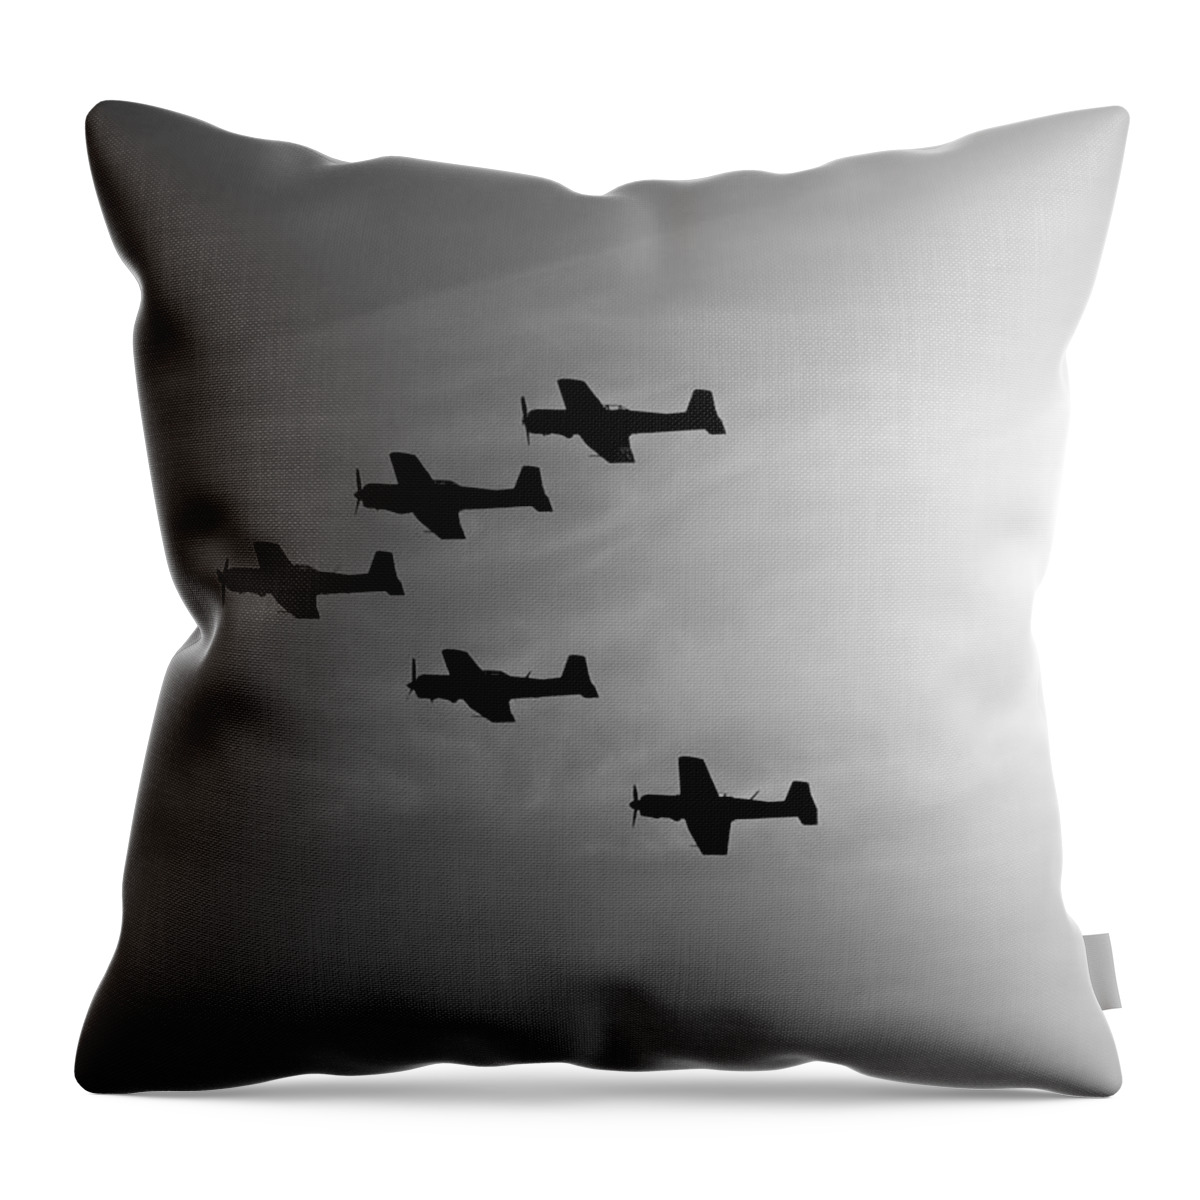 Aircraft Throw Pillow featuring the photograph Into The Sun by Joe Schofield